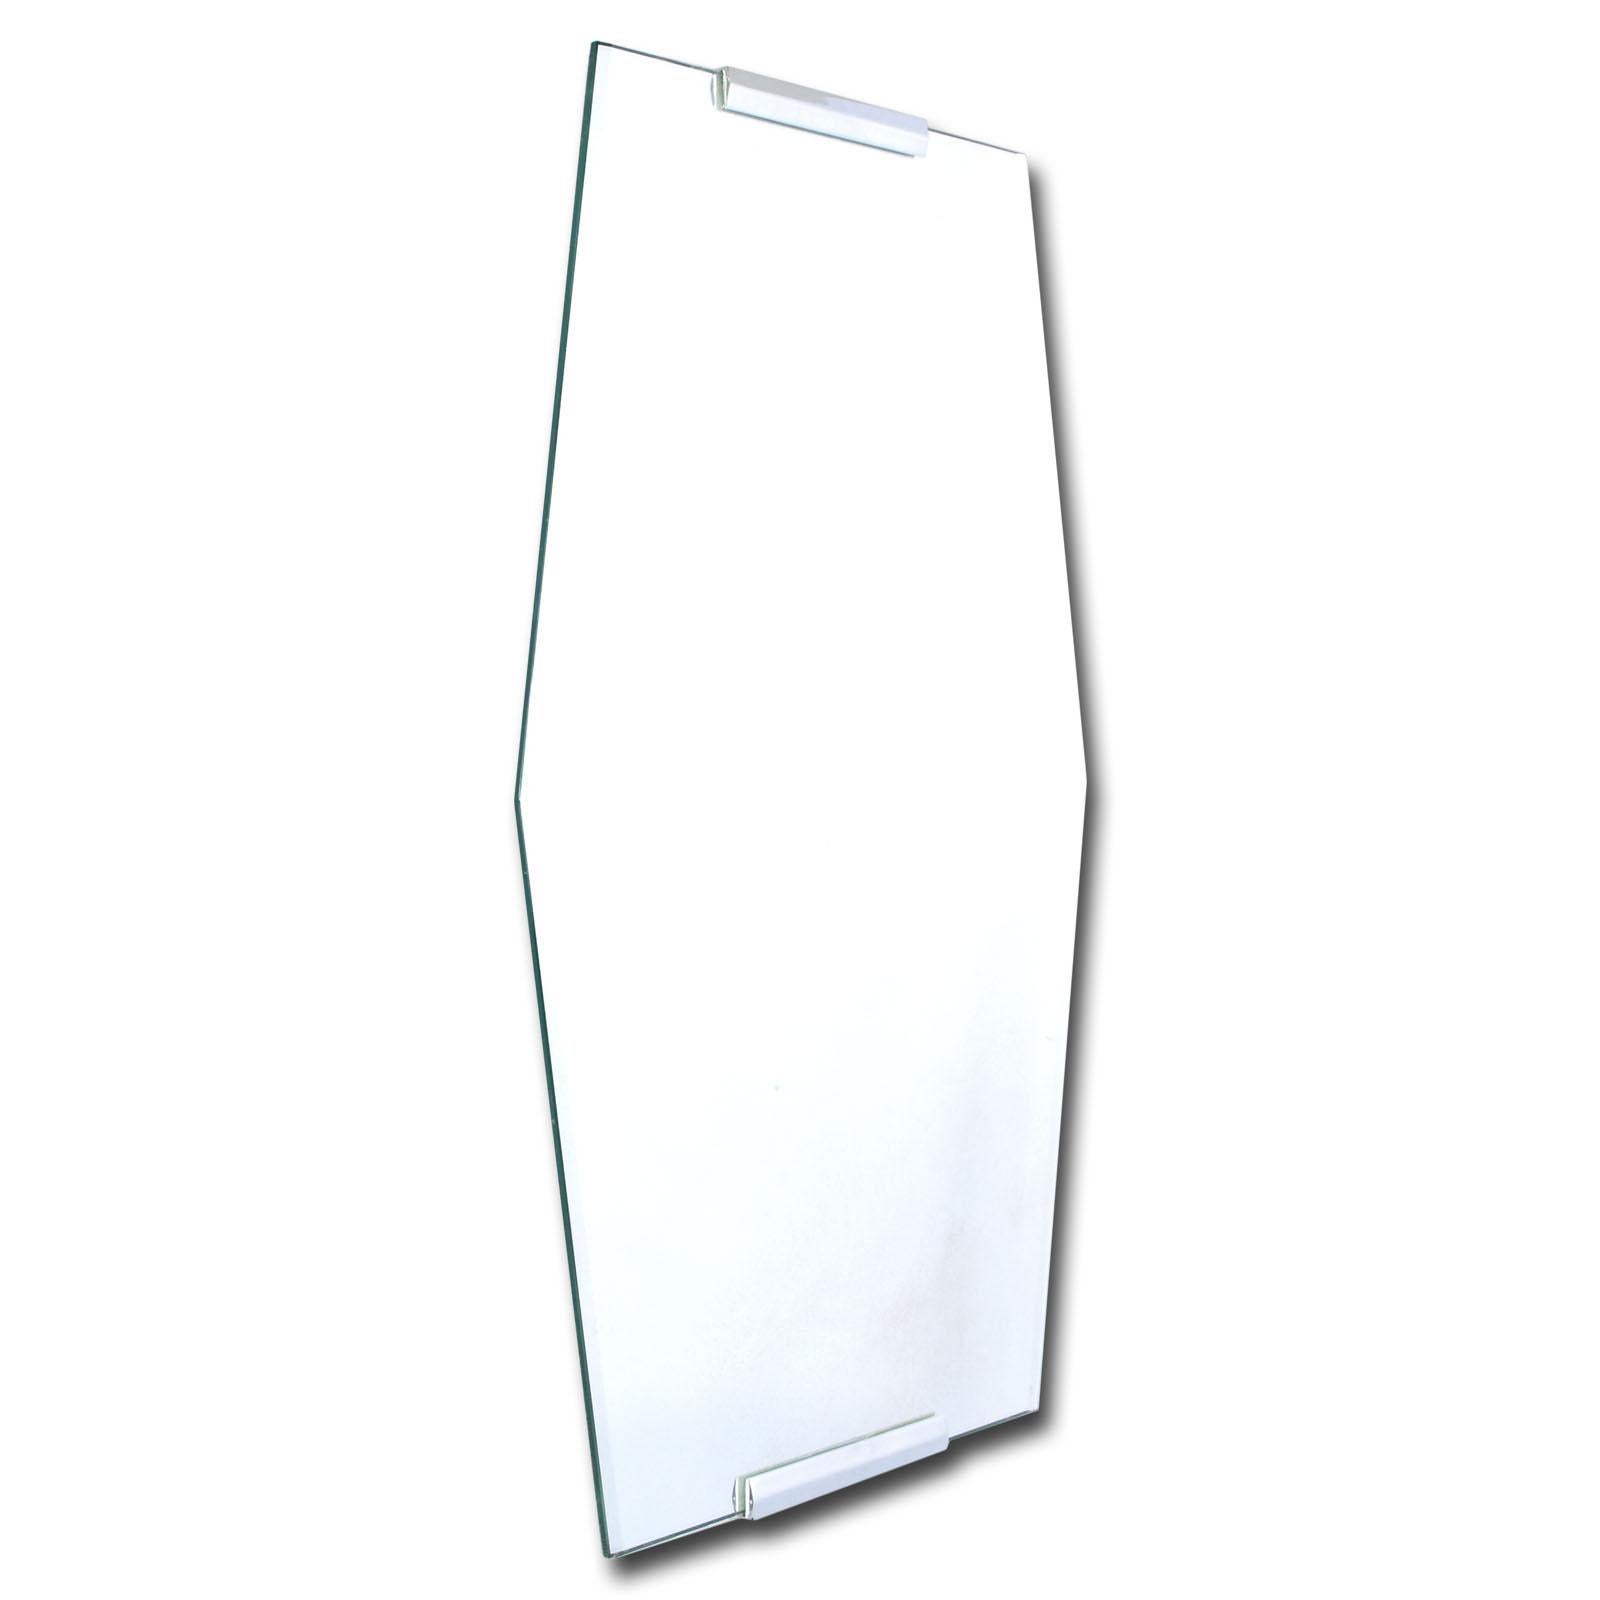 Fontana Arte Hexagon Wall Bevelled Mirror, Chrome Attacks, Excellent Conditions
Measures cm: H 73, W 50, D 3.

About the Author
Fontana Arte
Best known for its elegant and innovative vintage lighting pieces, the Milan-based firm Fontana Arte